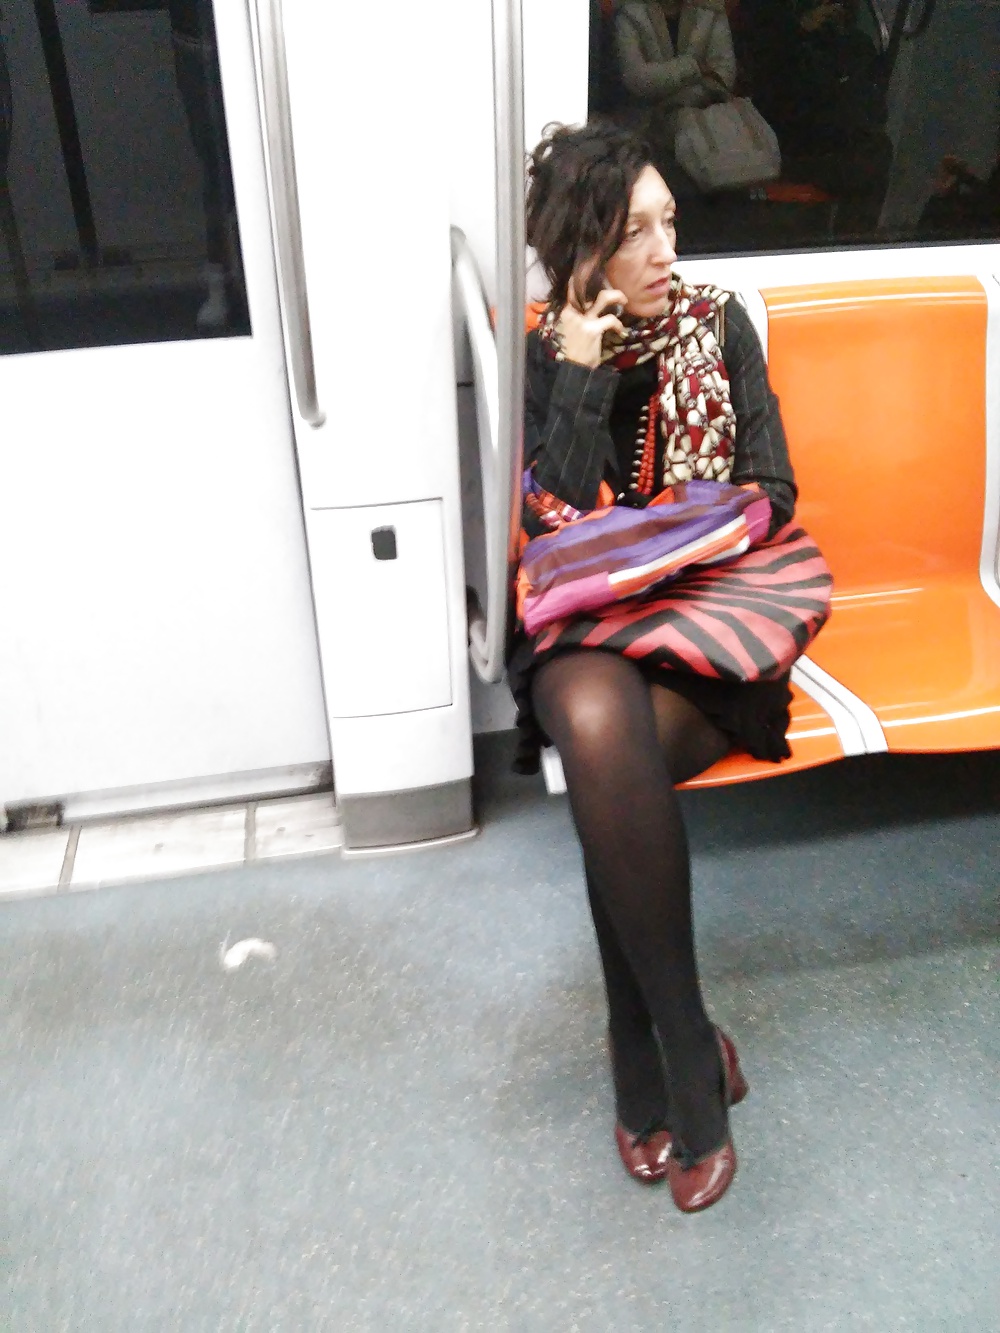 Italian (MILF) woman photographed in the subway (Italy) 2 #31402454